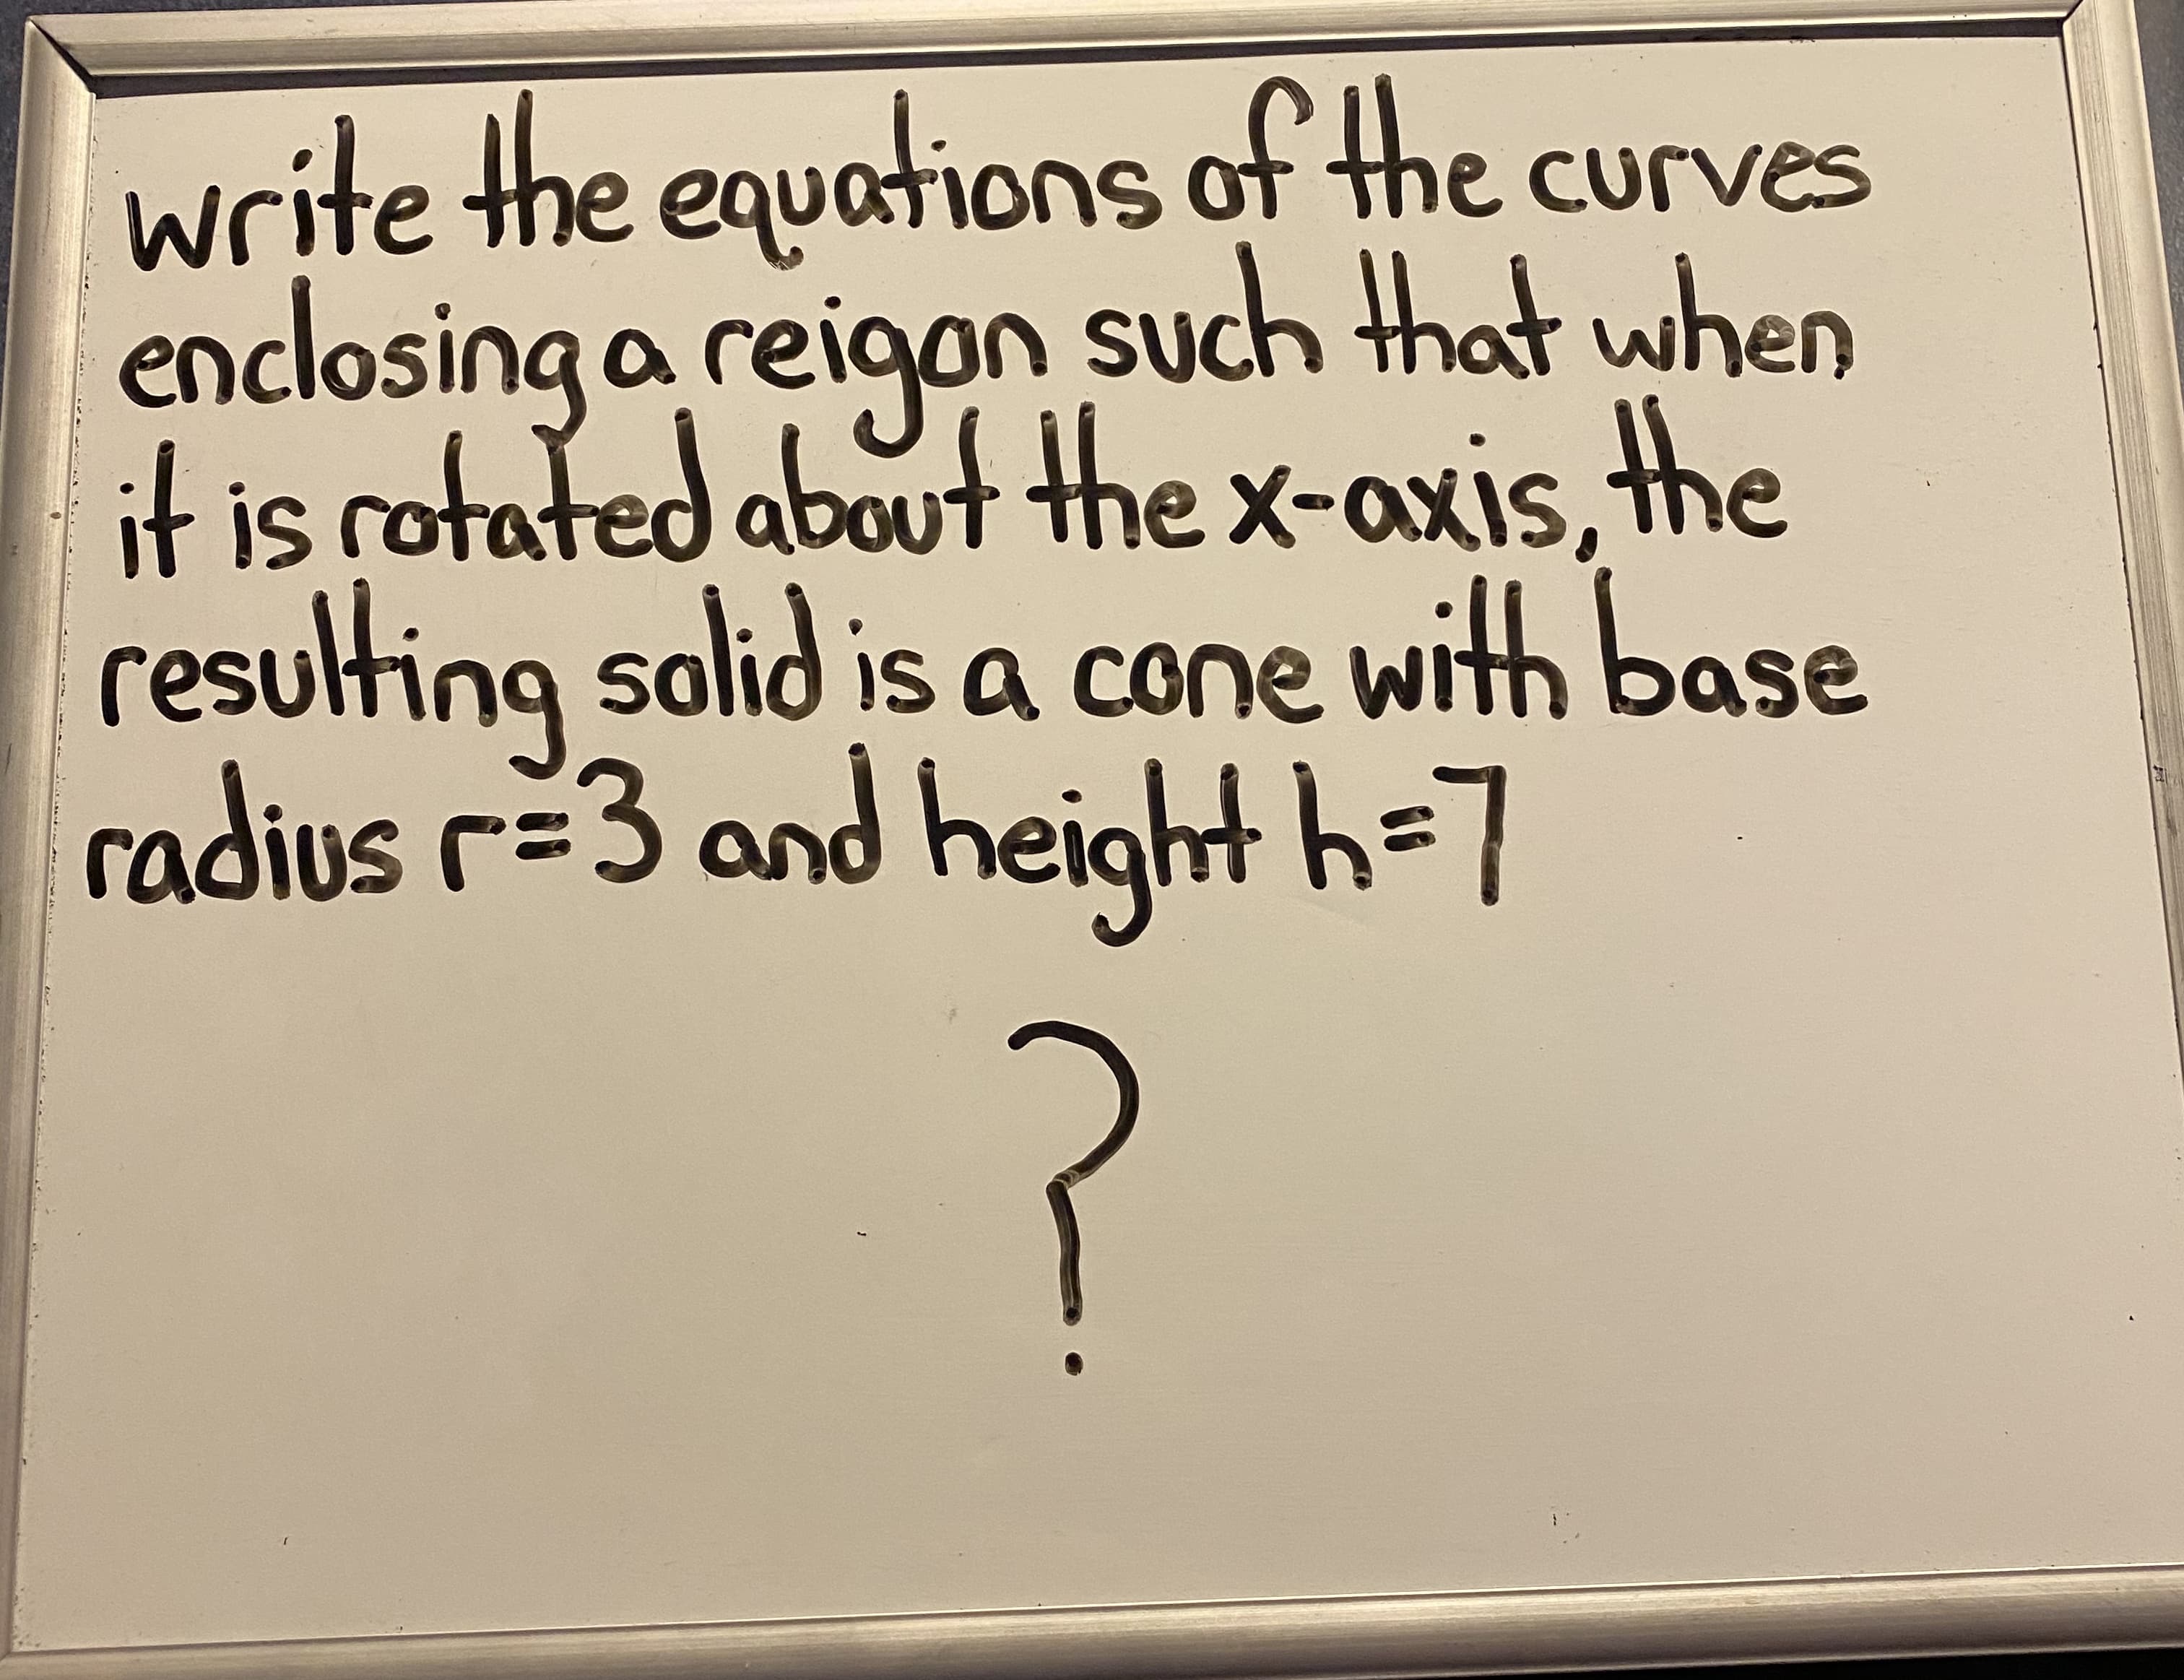 write the equationns of the curves
enclosing a reigon such that when
it is rotated aboutthe x-axis, the
resulting solid is a cone with base
radius r=3 and height h=7
n SUC
